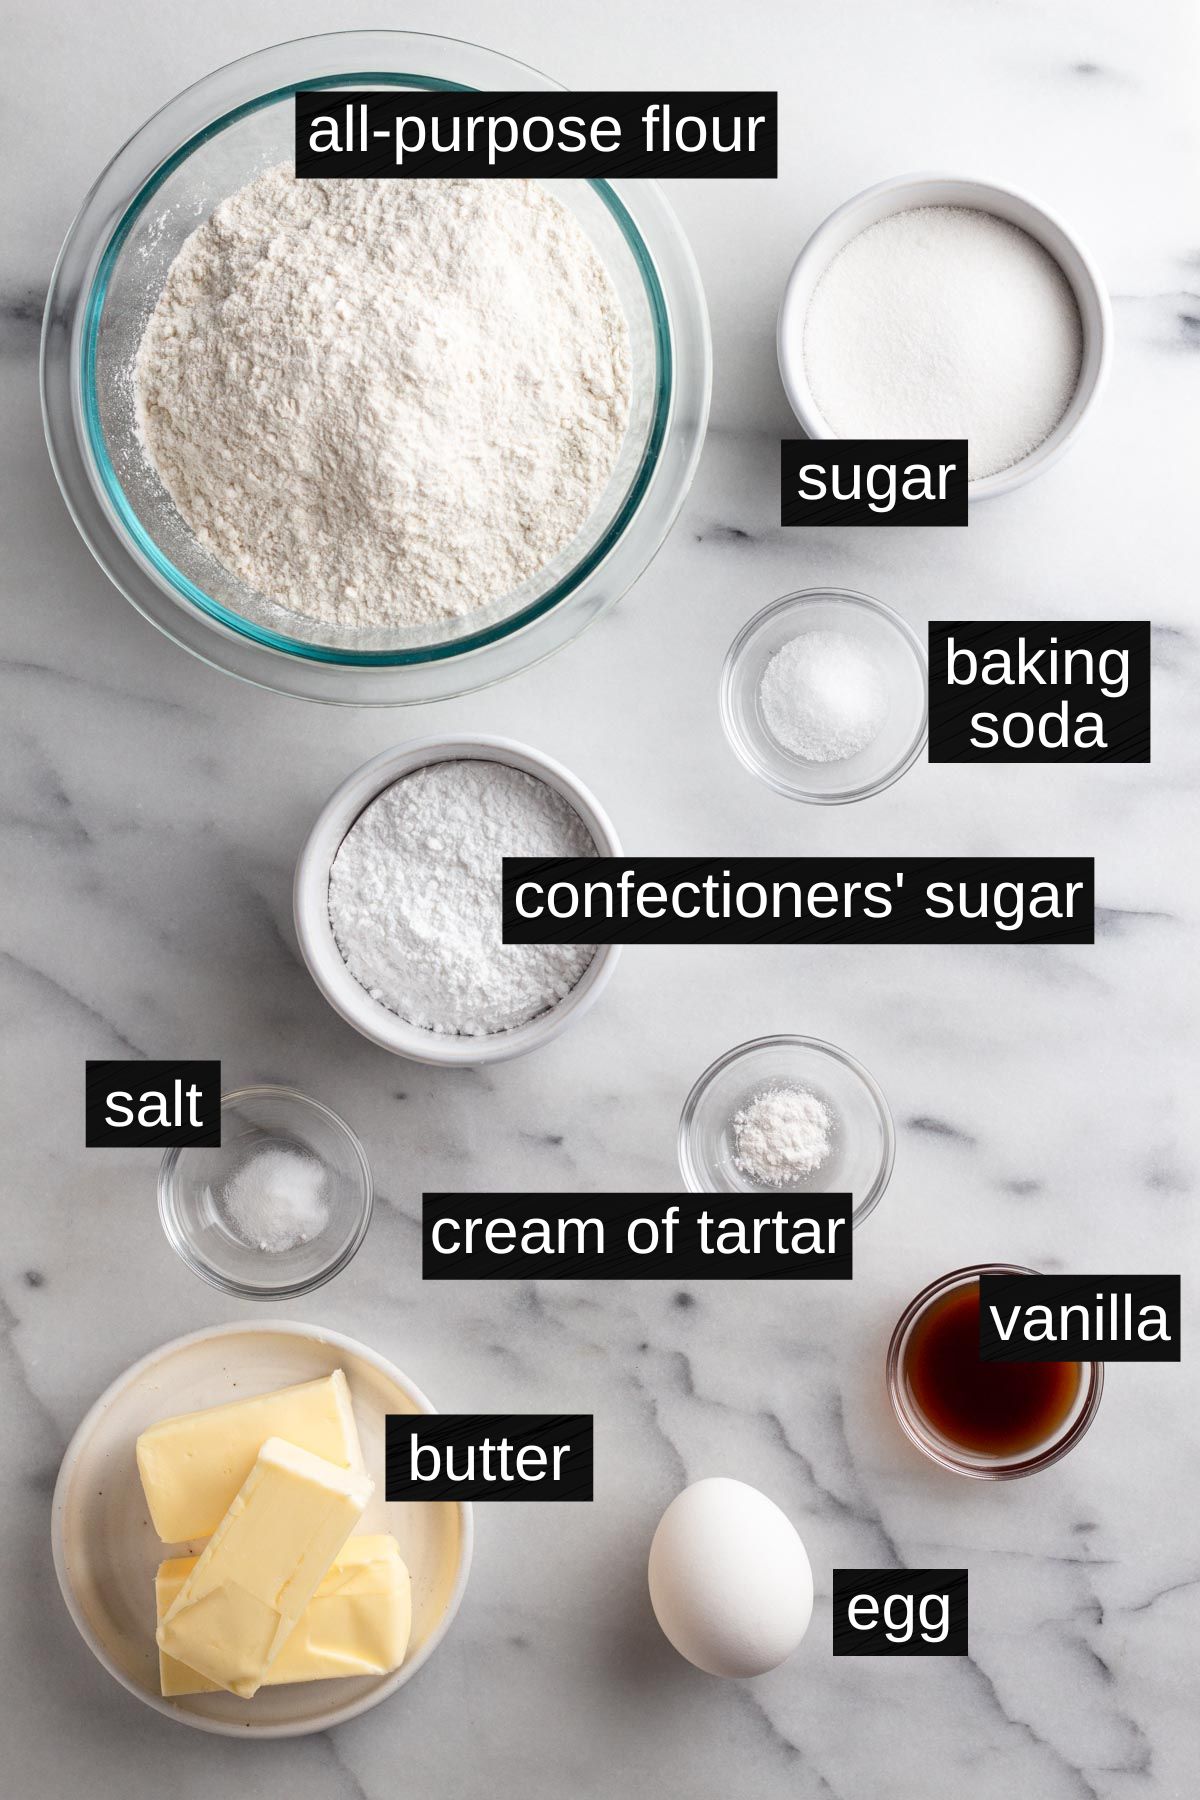 Cookie dough ingredients on a marble surface.